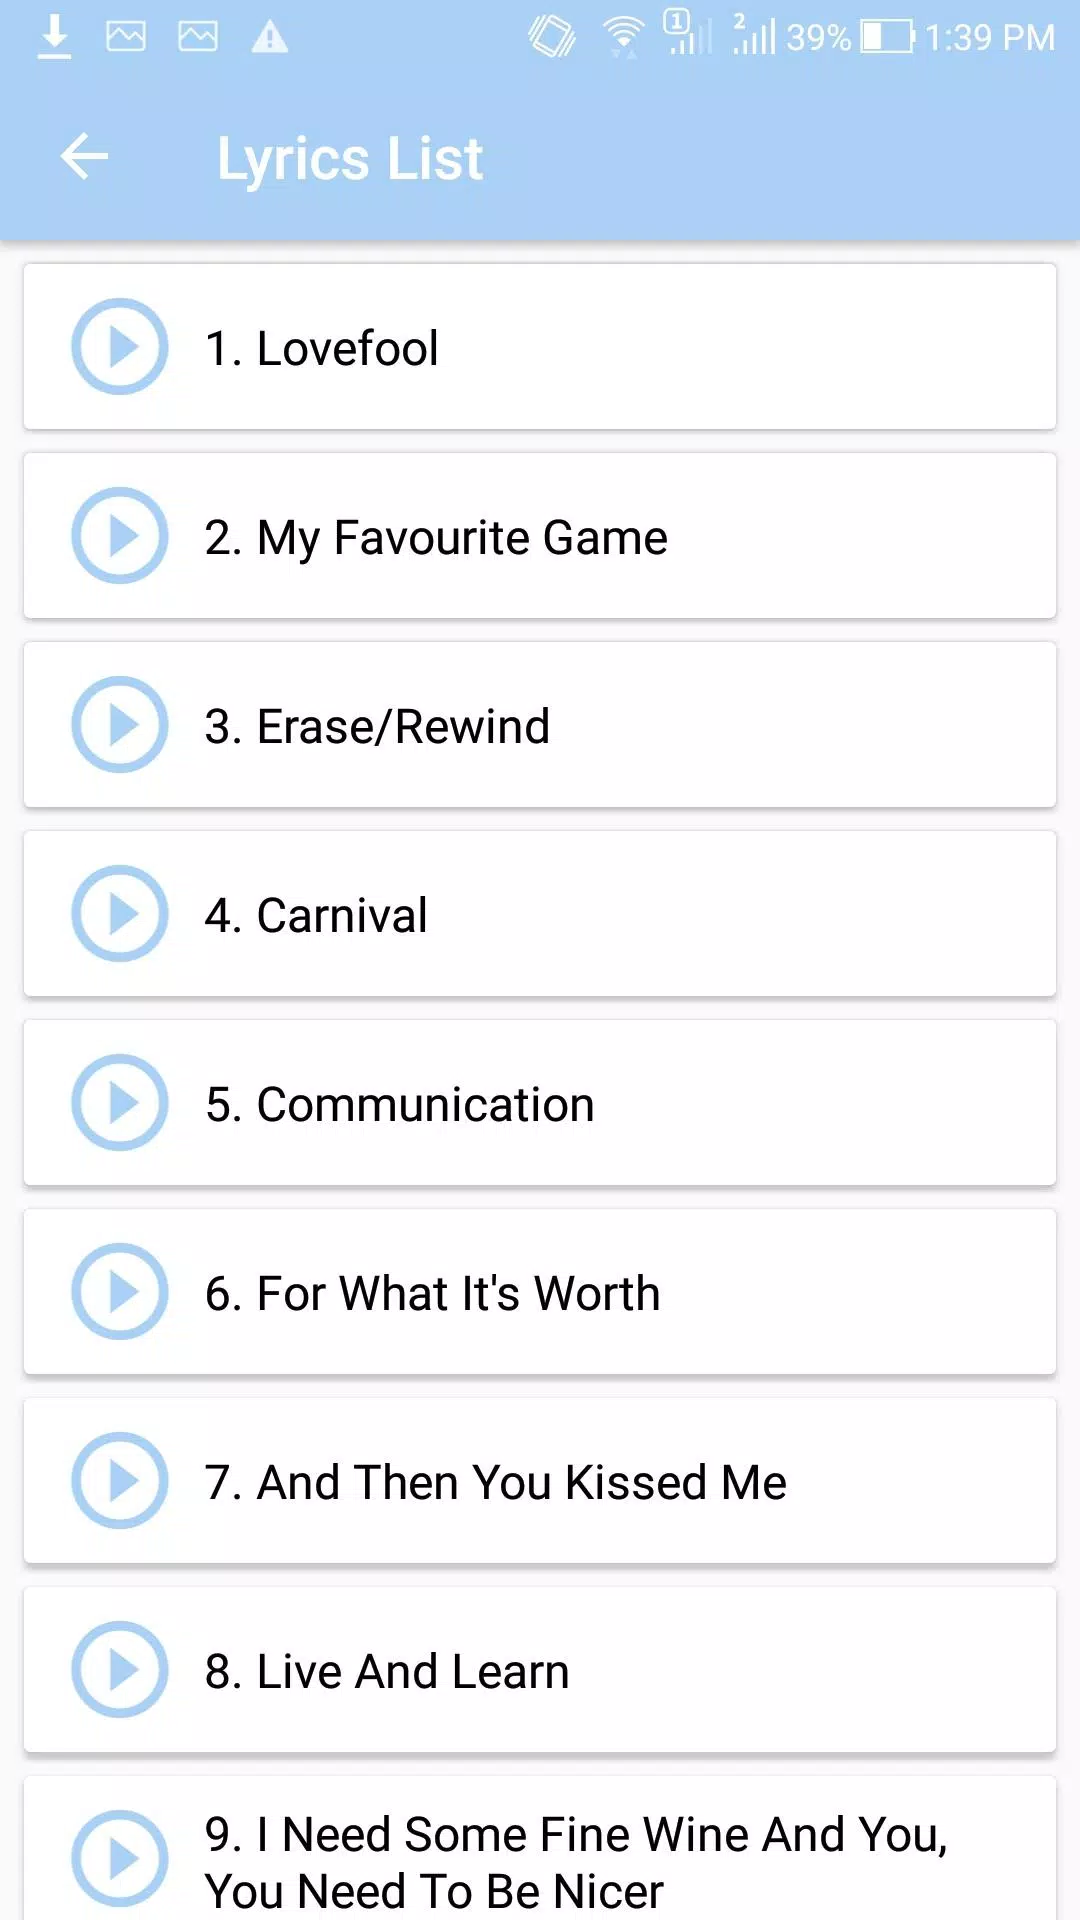 The Cardigans: Top Songs & Lyrics APK for Android Download